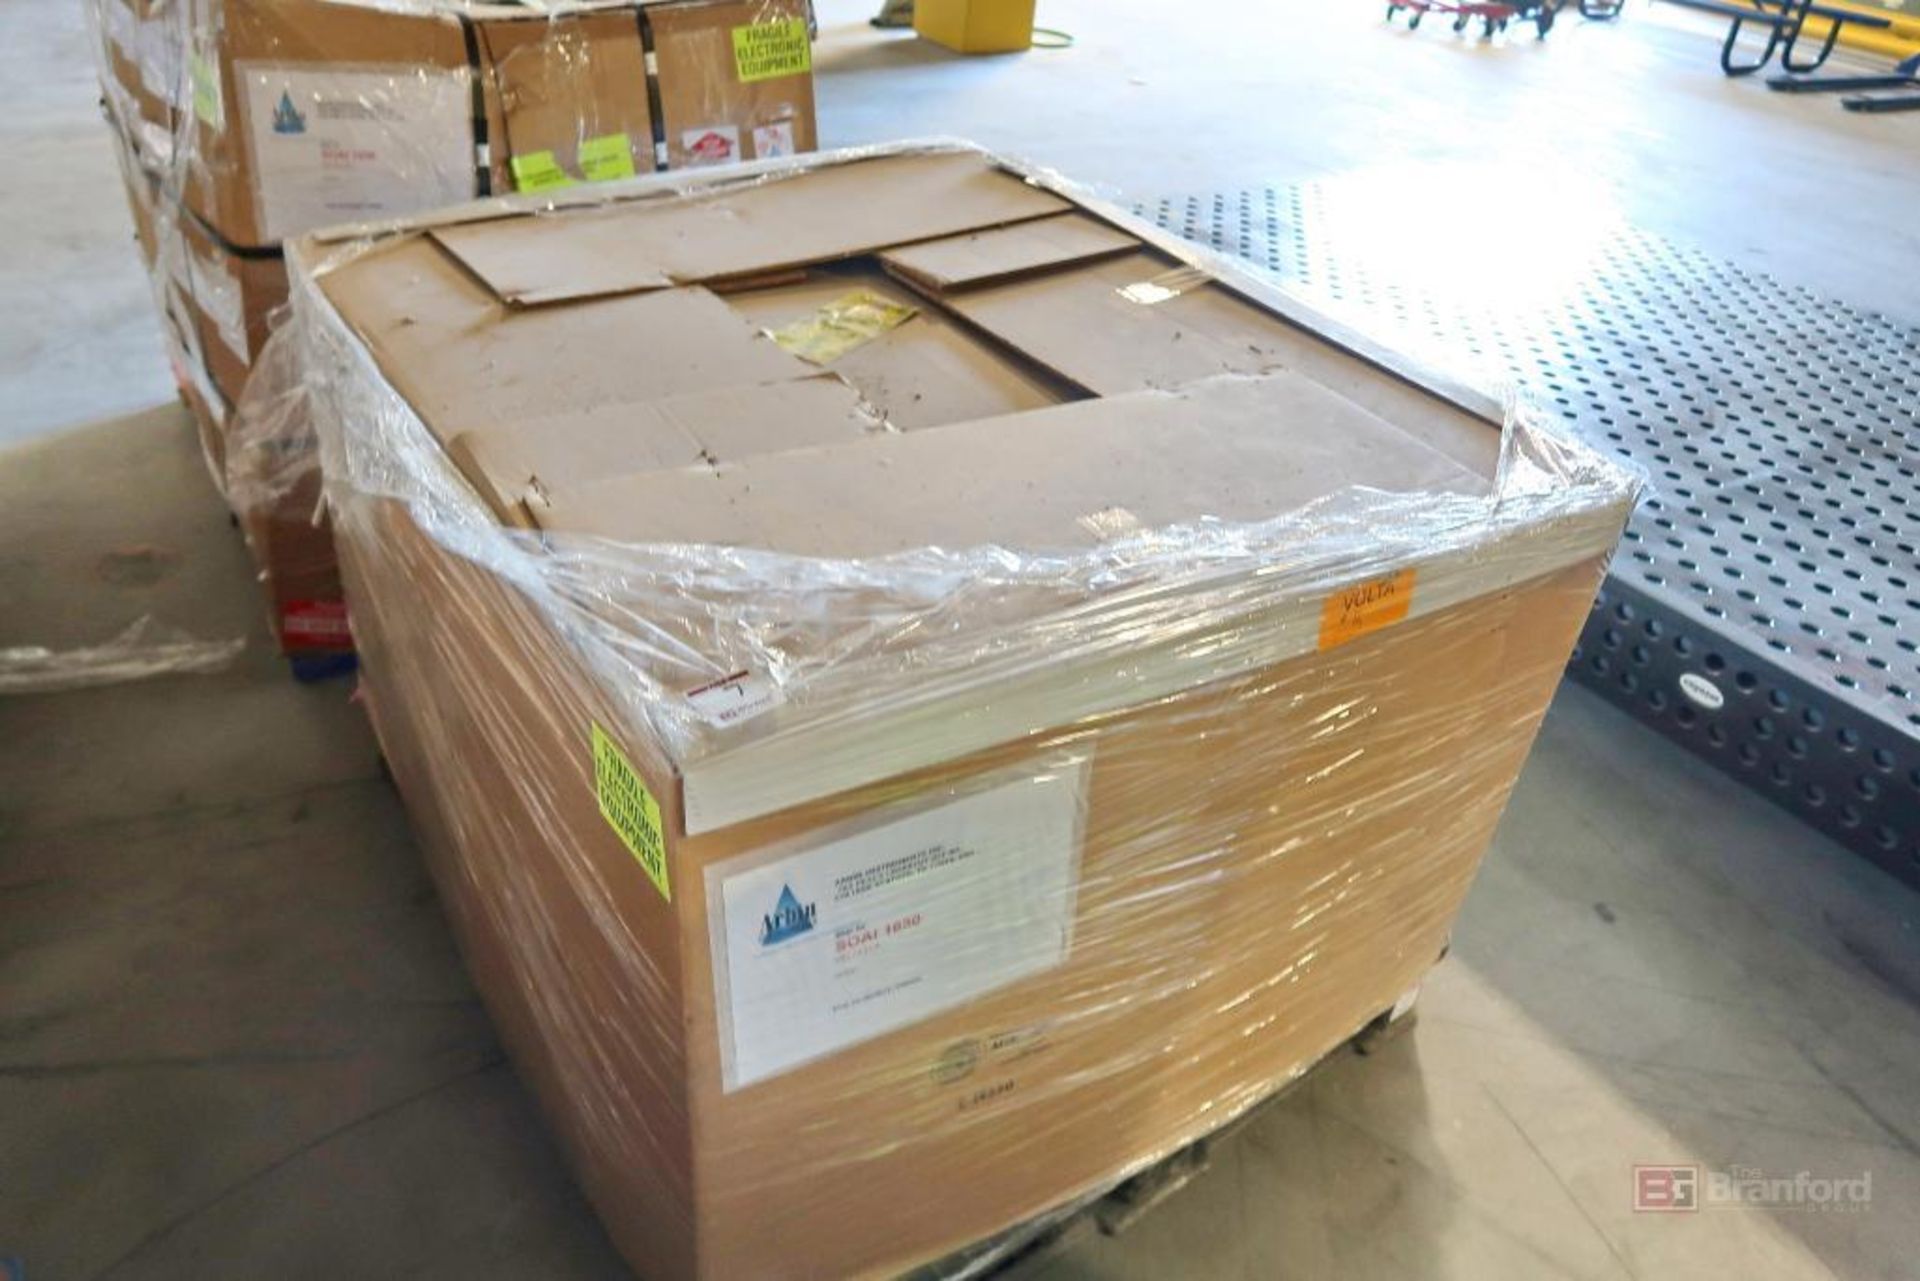 Pallet Crate of Arbin 500-A Copper Cables